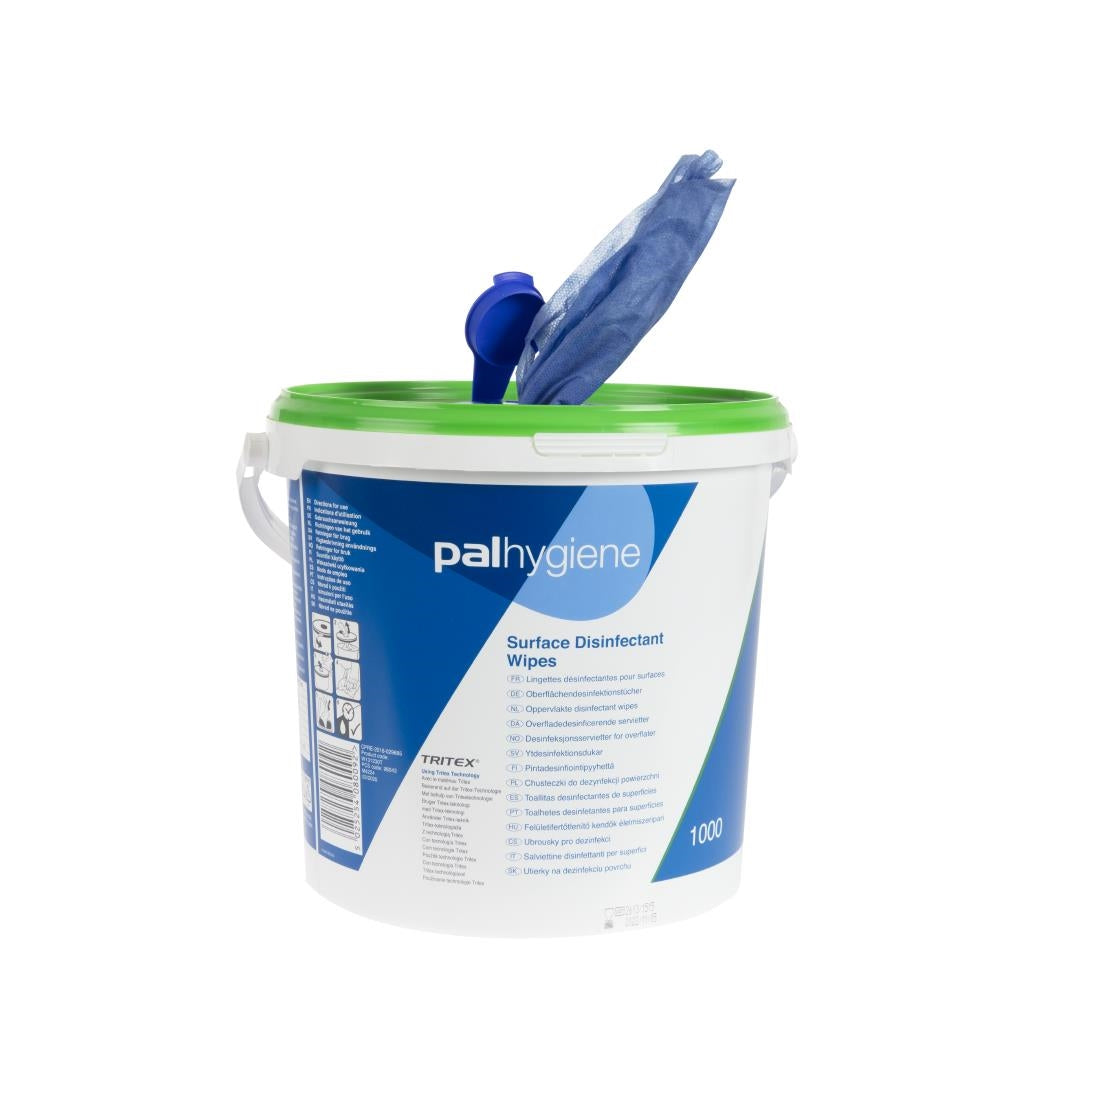 J860 Pal TX Disinfectant Surface Wipes